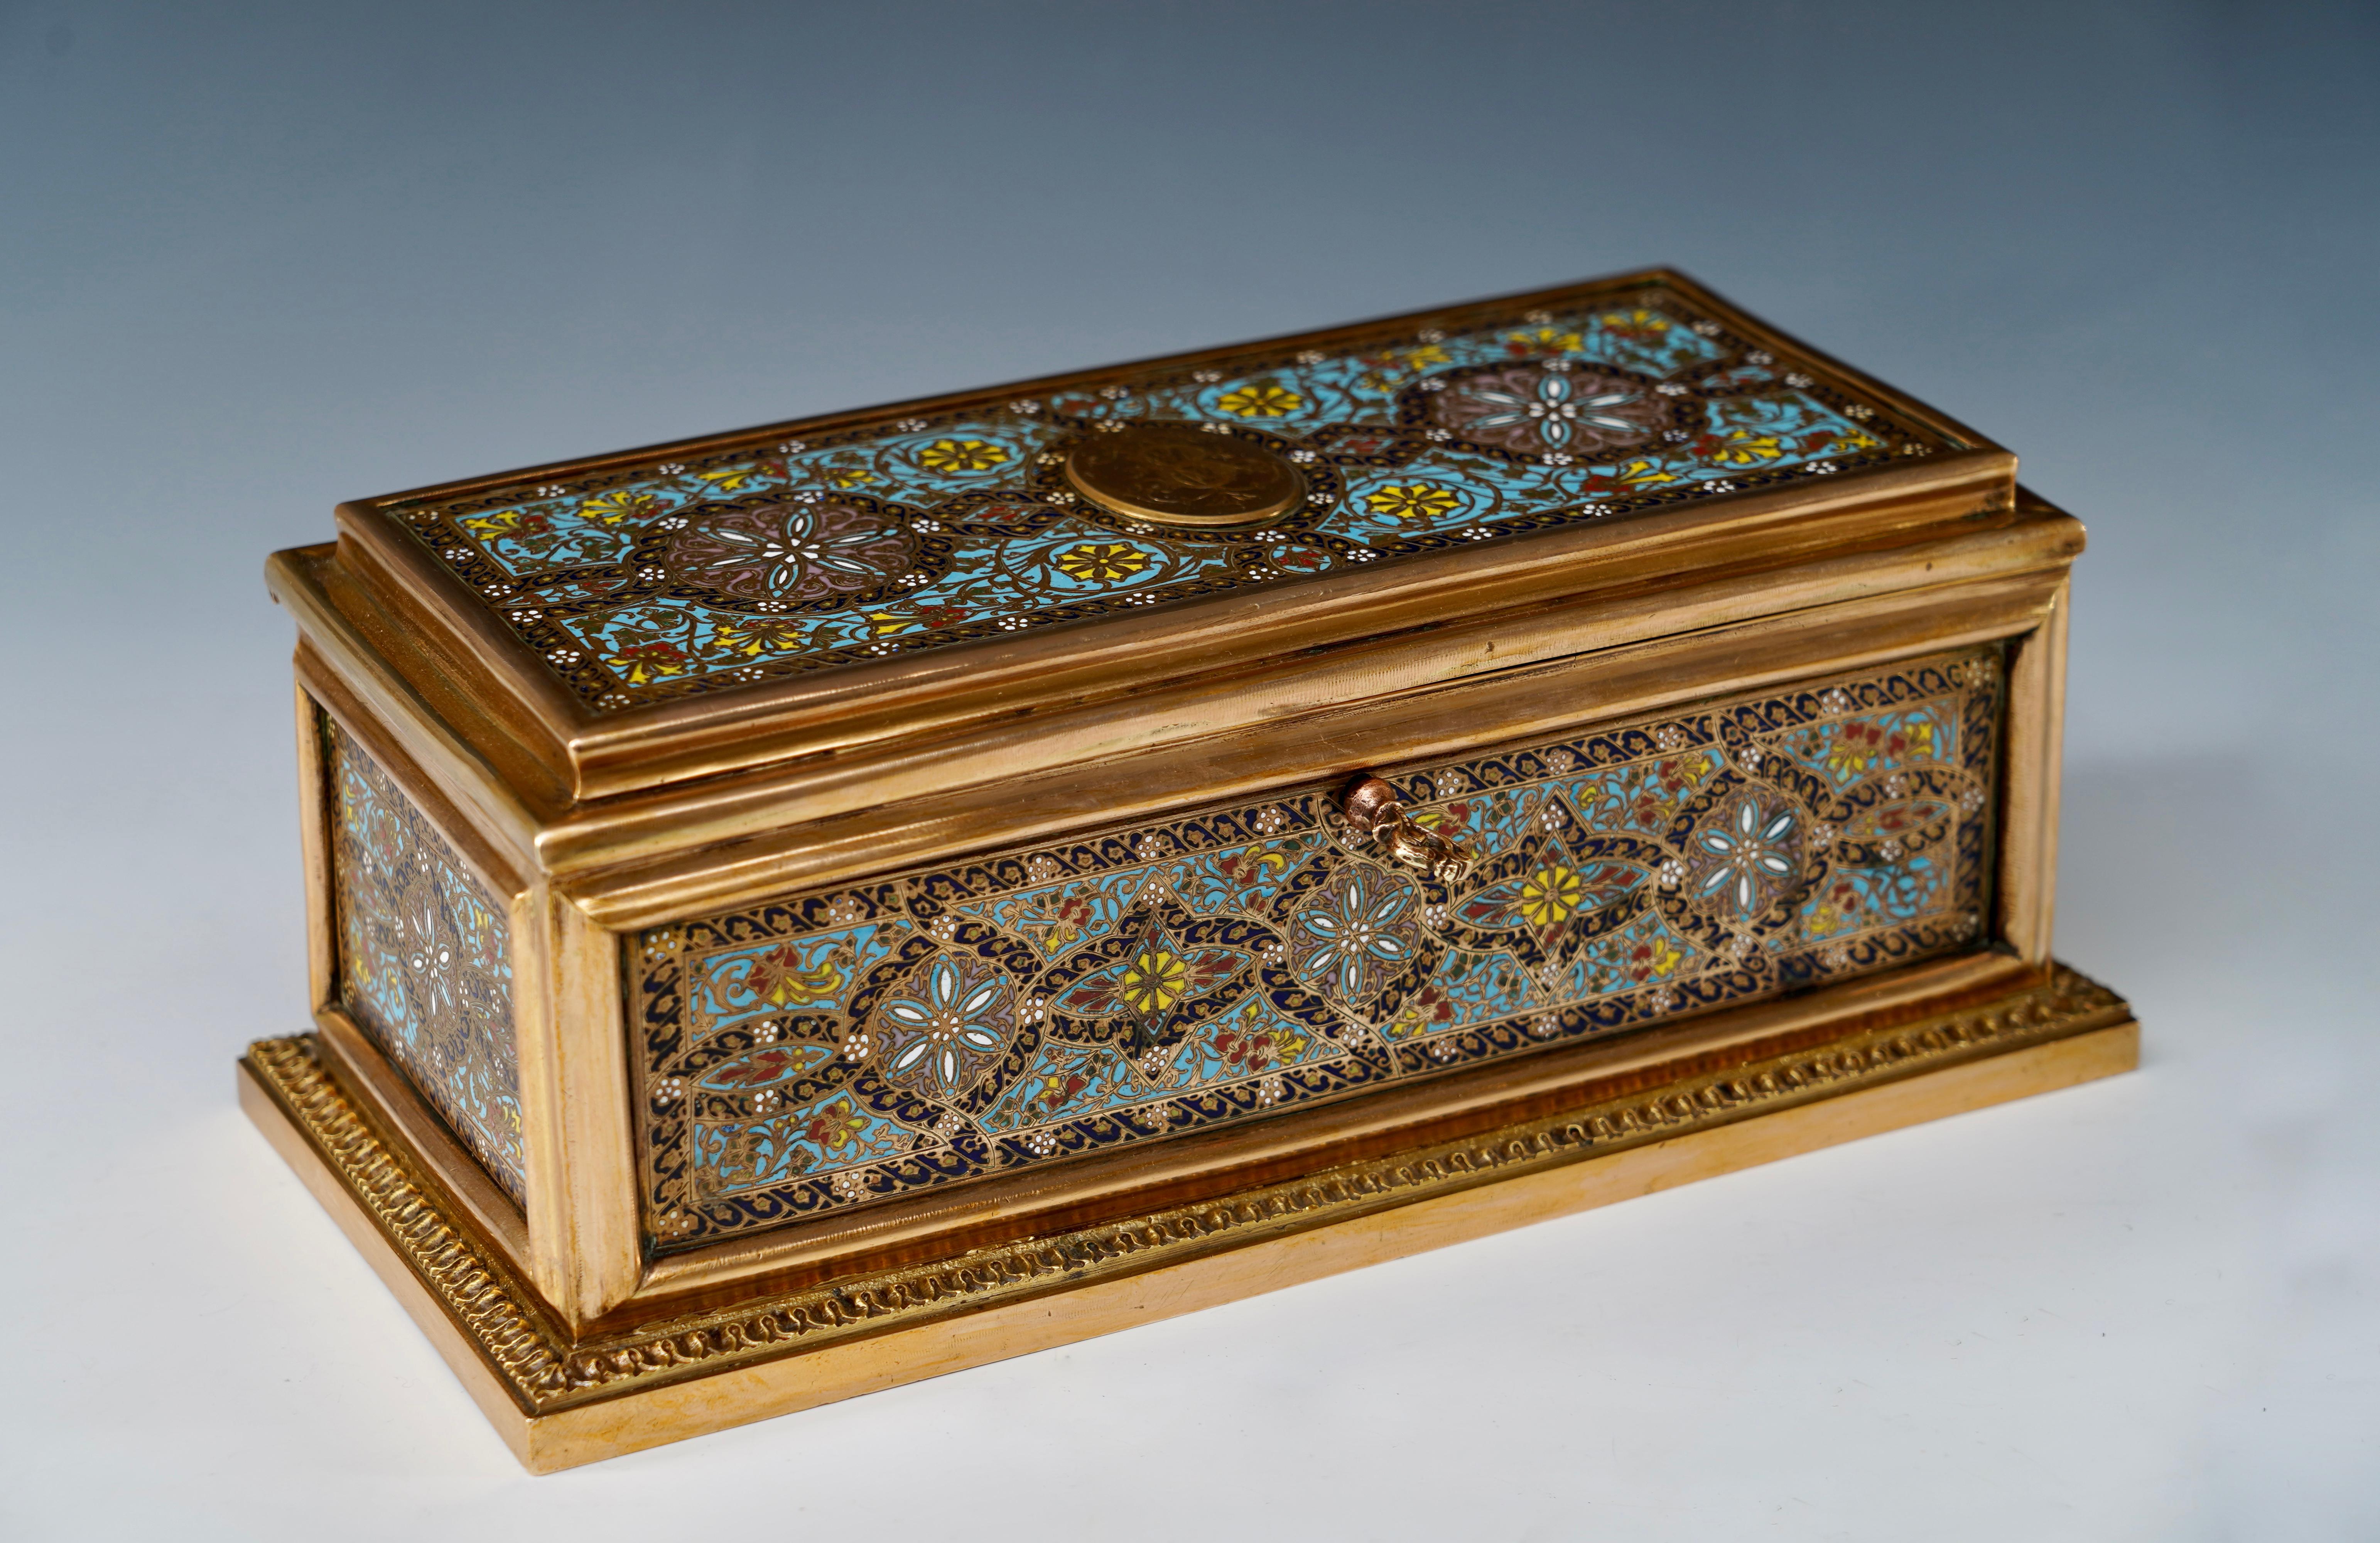 Signed Tahan, Boult des Italiens 11

A lovely rectangular casket made in gilded bronze, entirely decorated with polychrome “champlevé” enamel rosettes and stylized flowers, and embellished on the top with a monogram. It has preserved its original